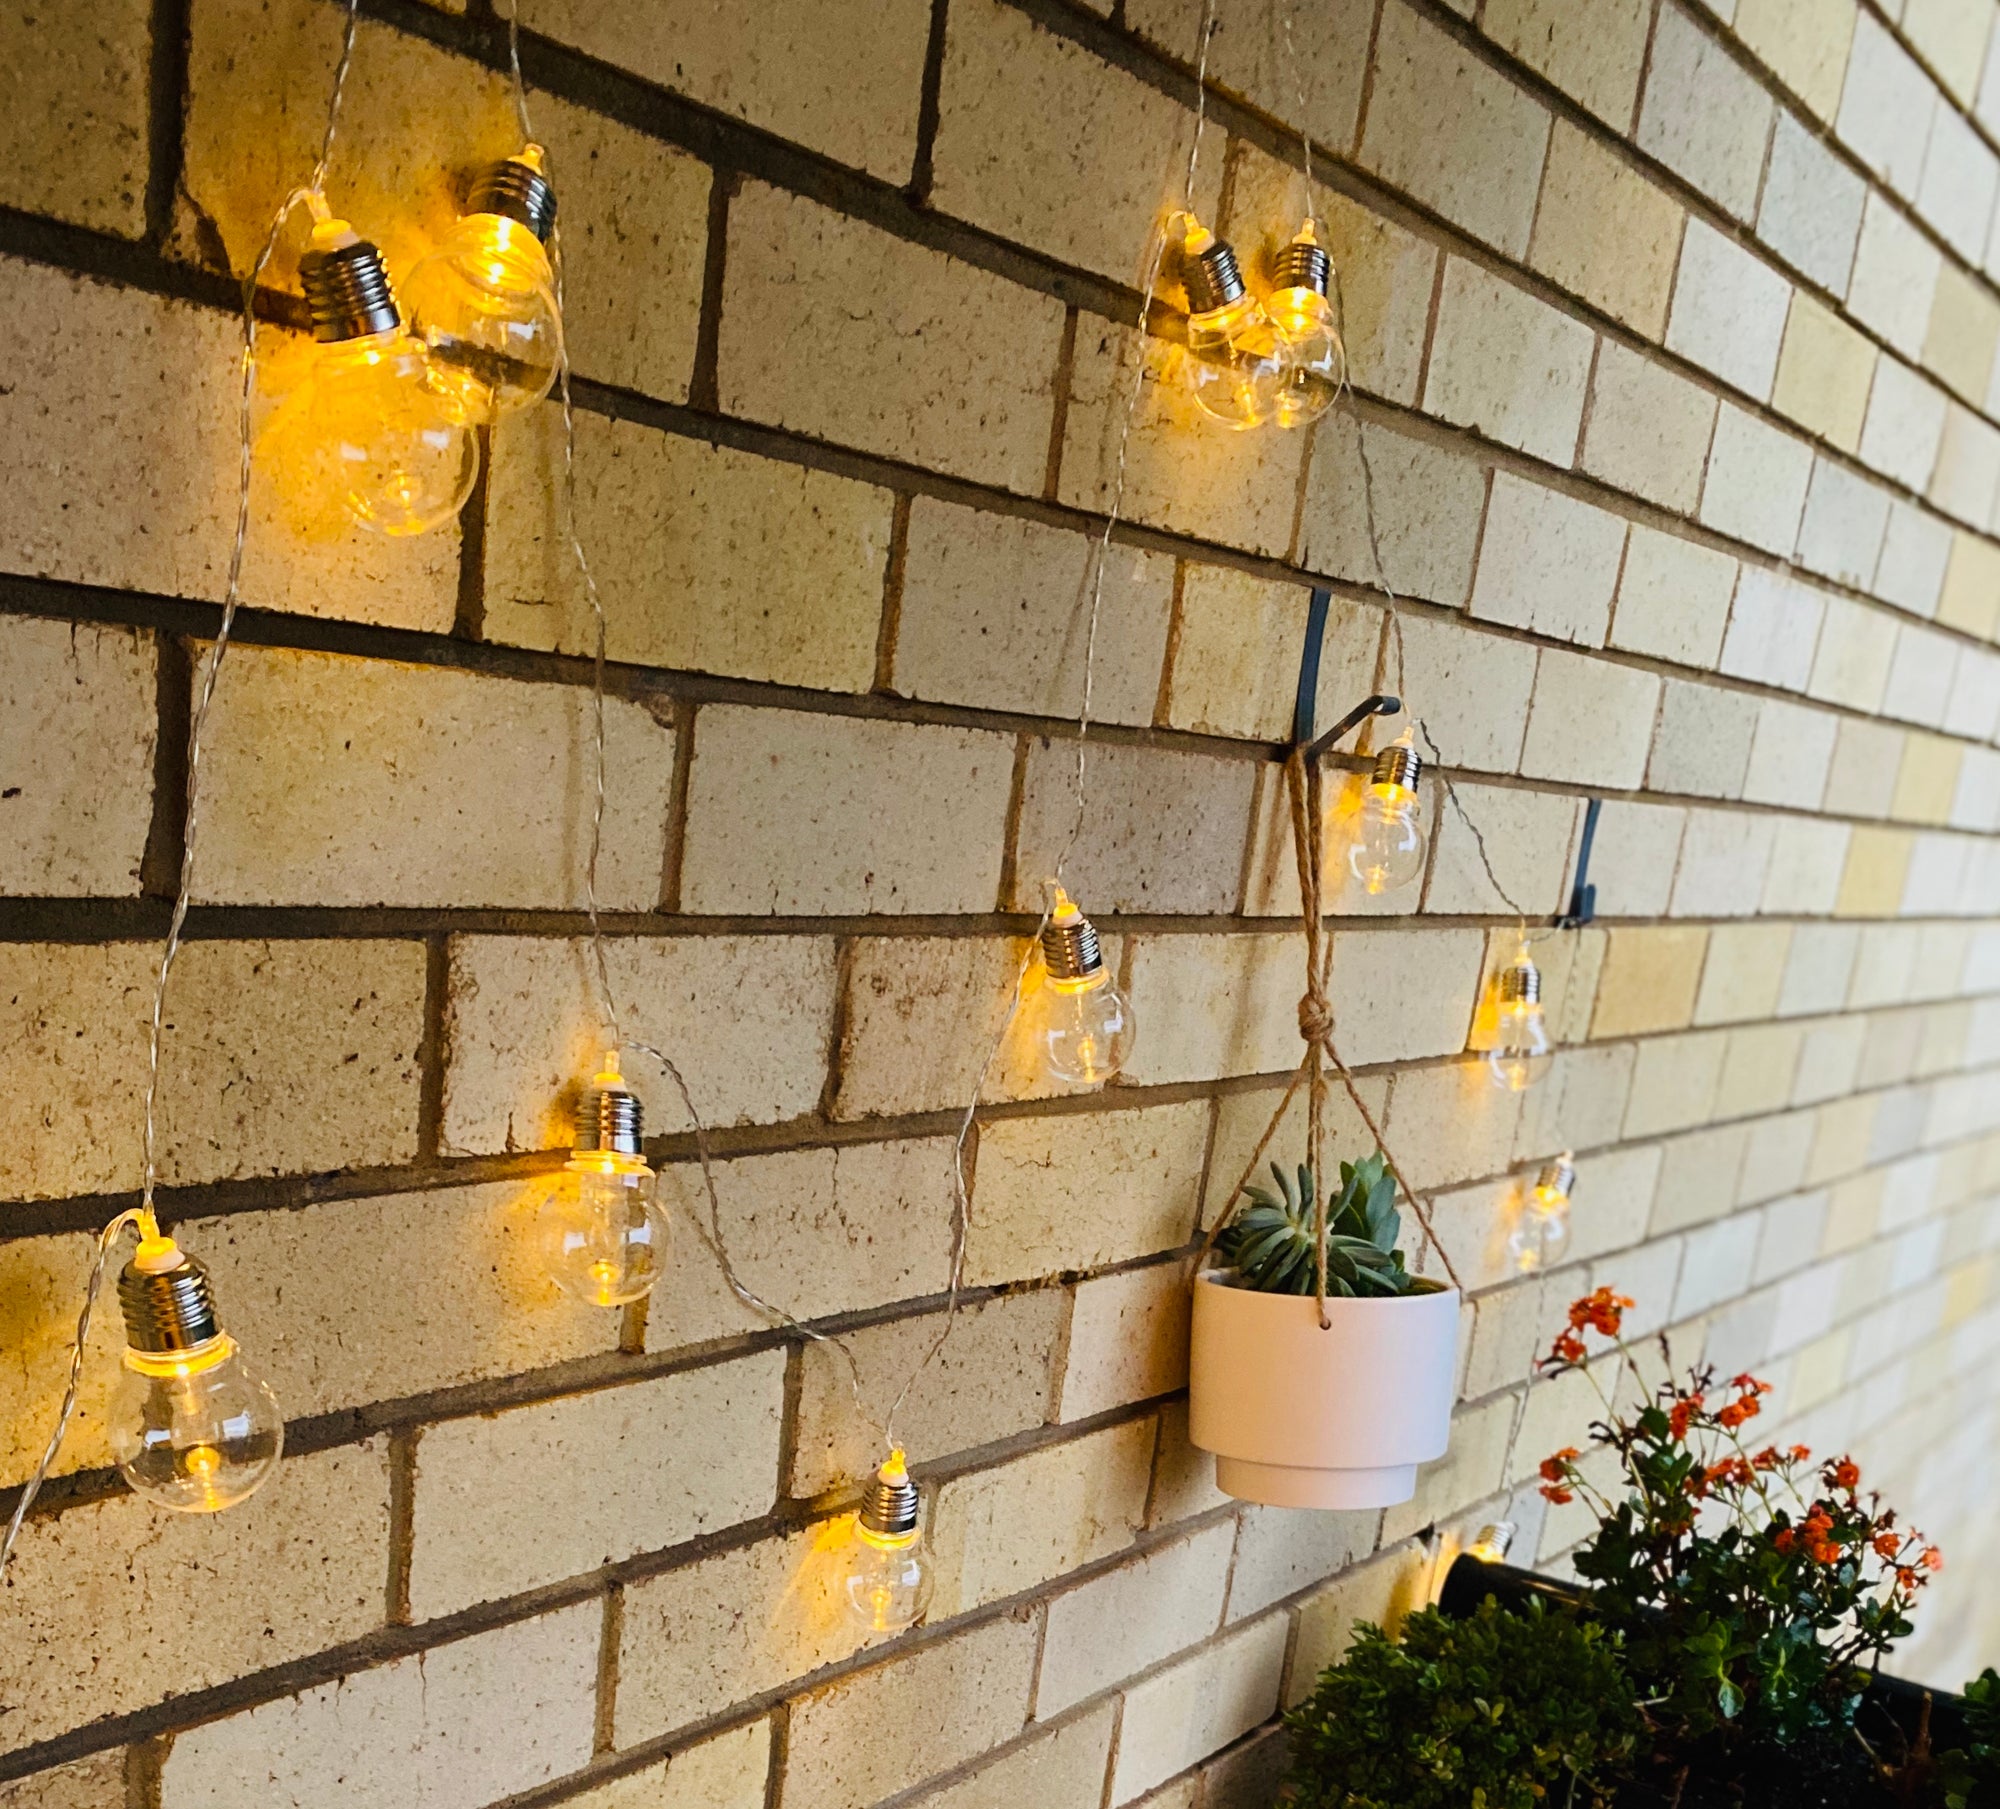 String lights and plants hanging on the brick wall using the Brick Grips' Brick Hanger to support without damaging the wall.